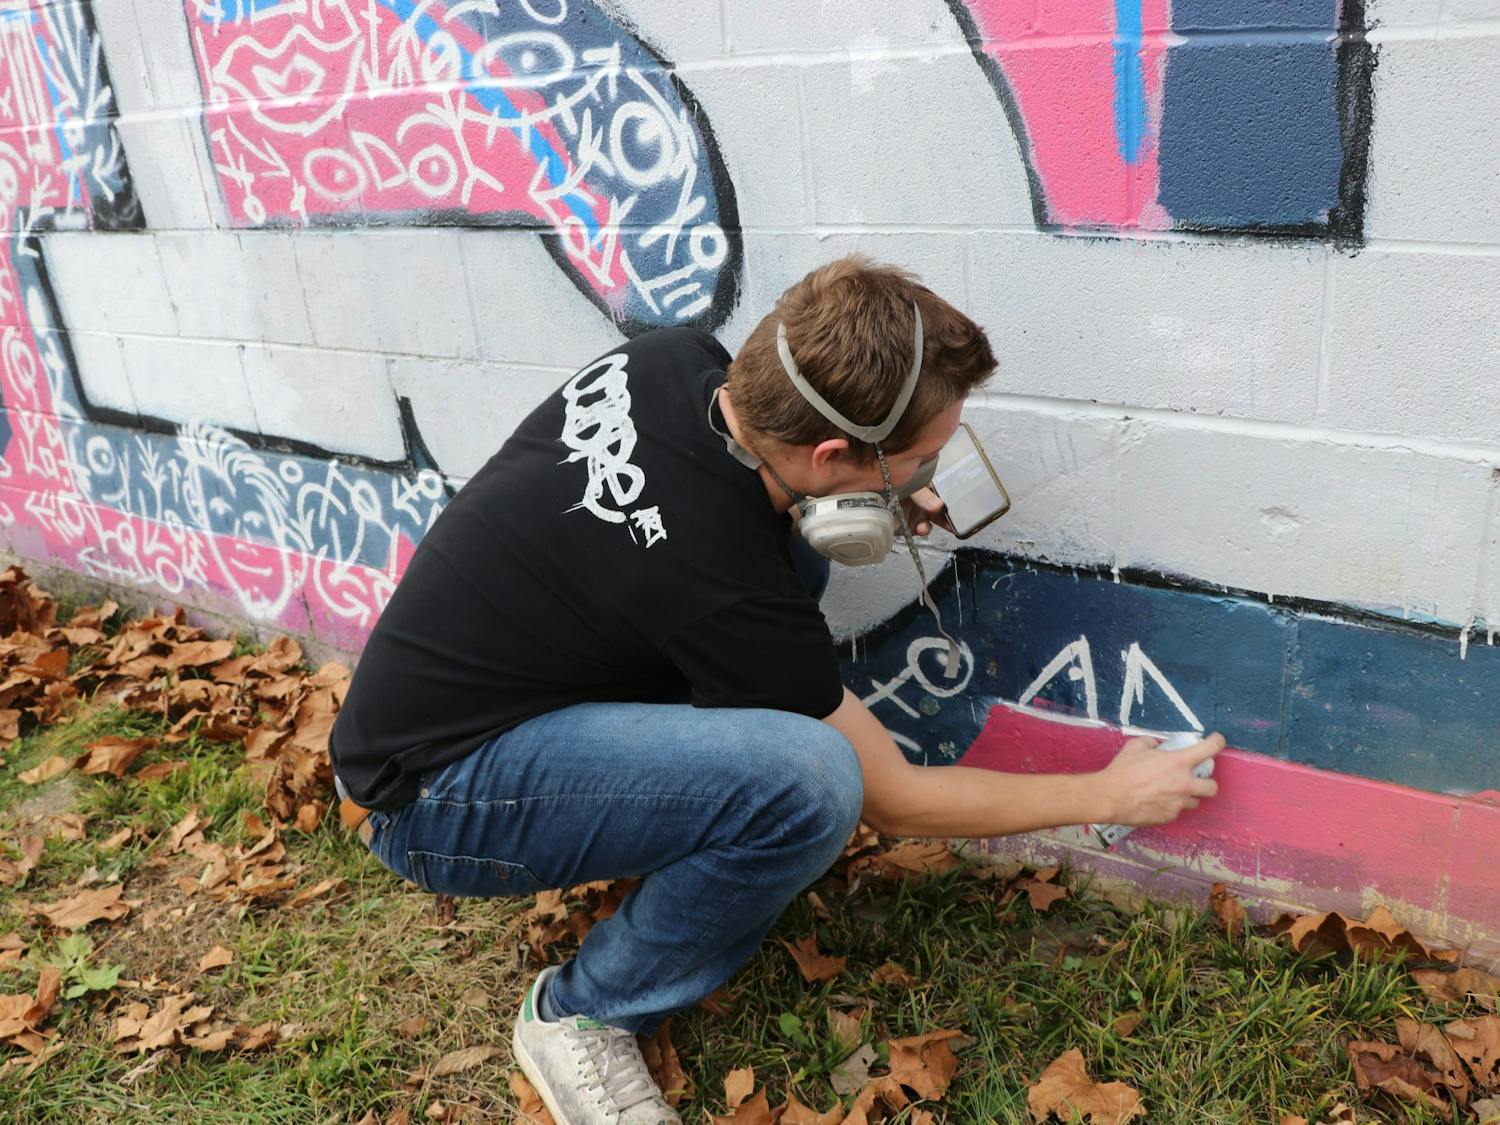 GALLERY: Sophomore Trenton Musch creates murals using only spray paint